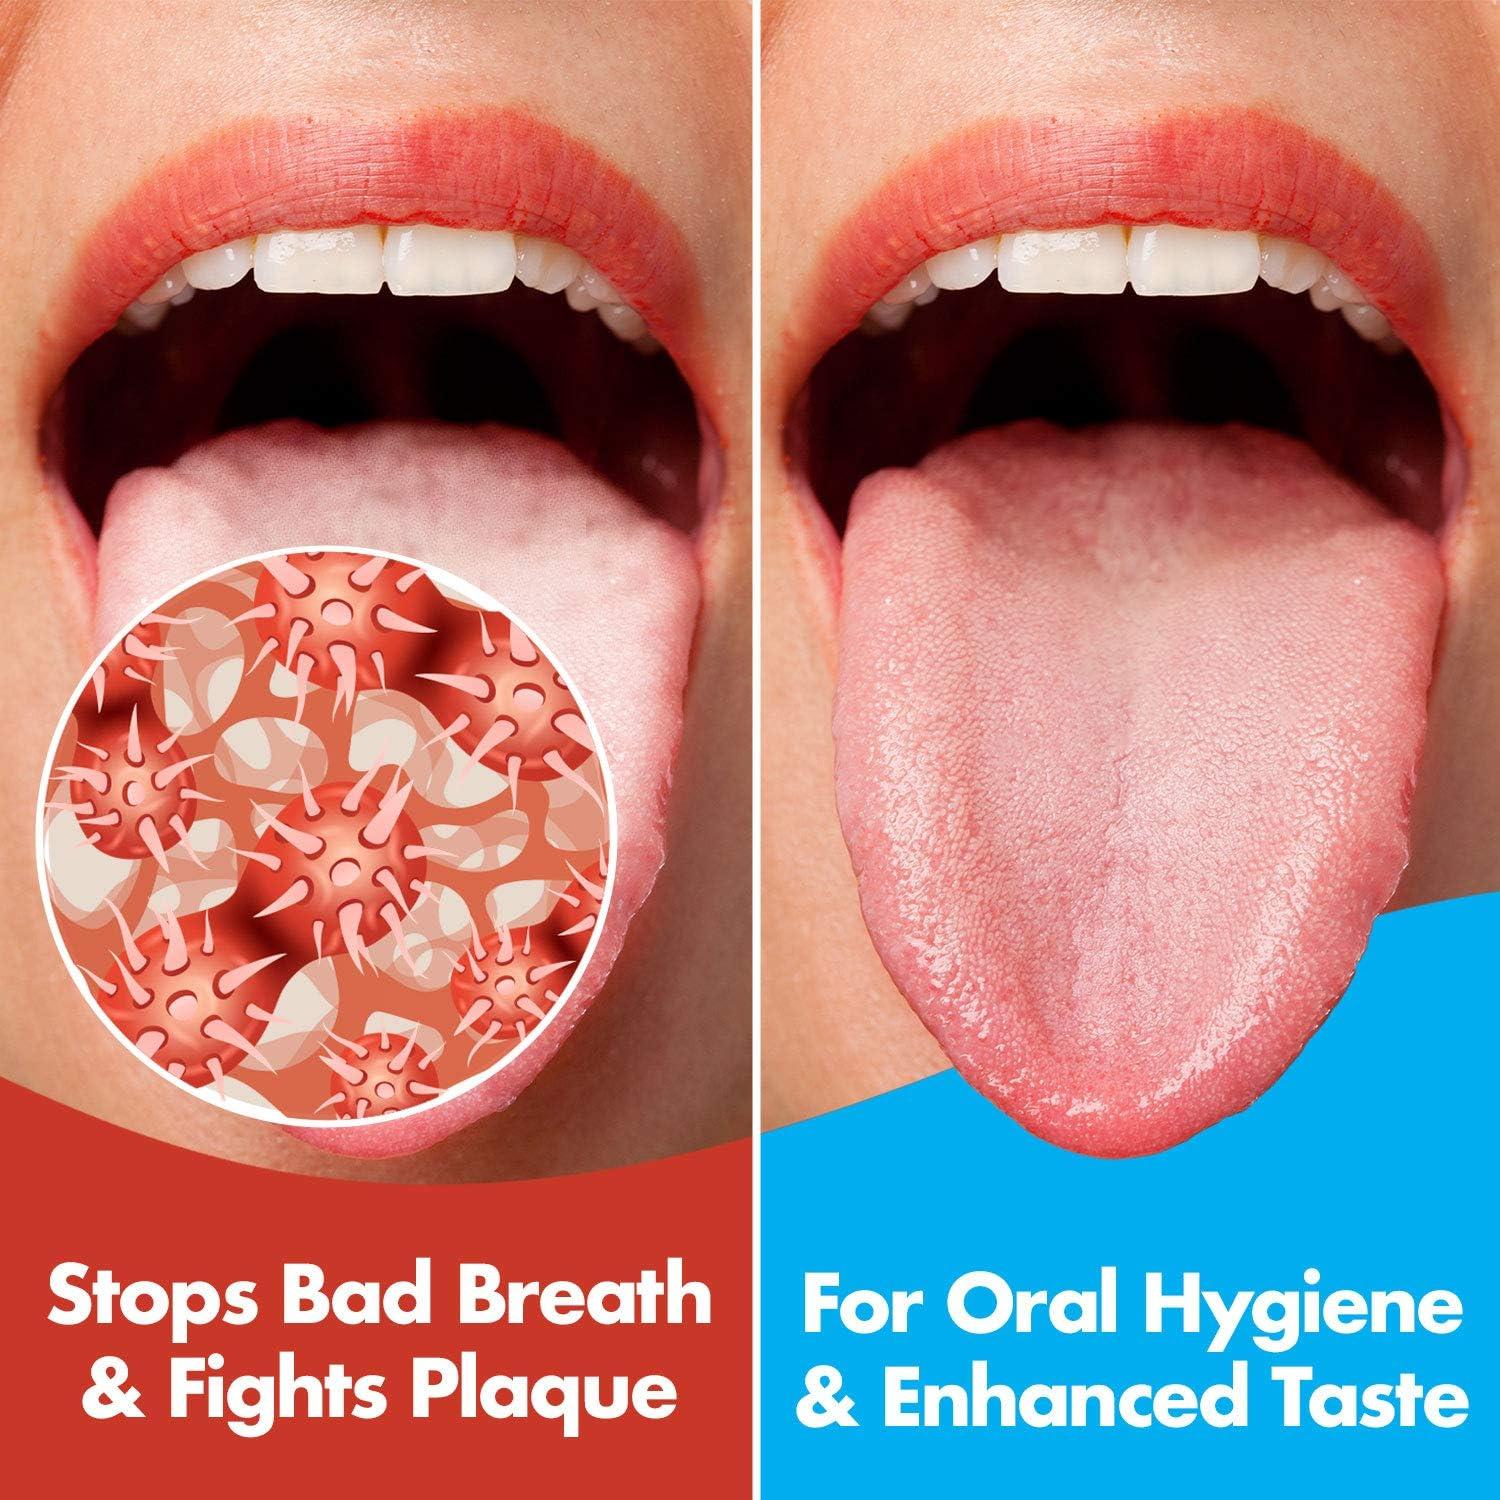 Tongue scraper for plaque and bacteria in the mouth